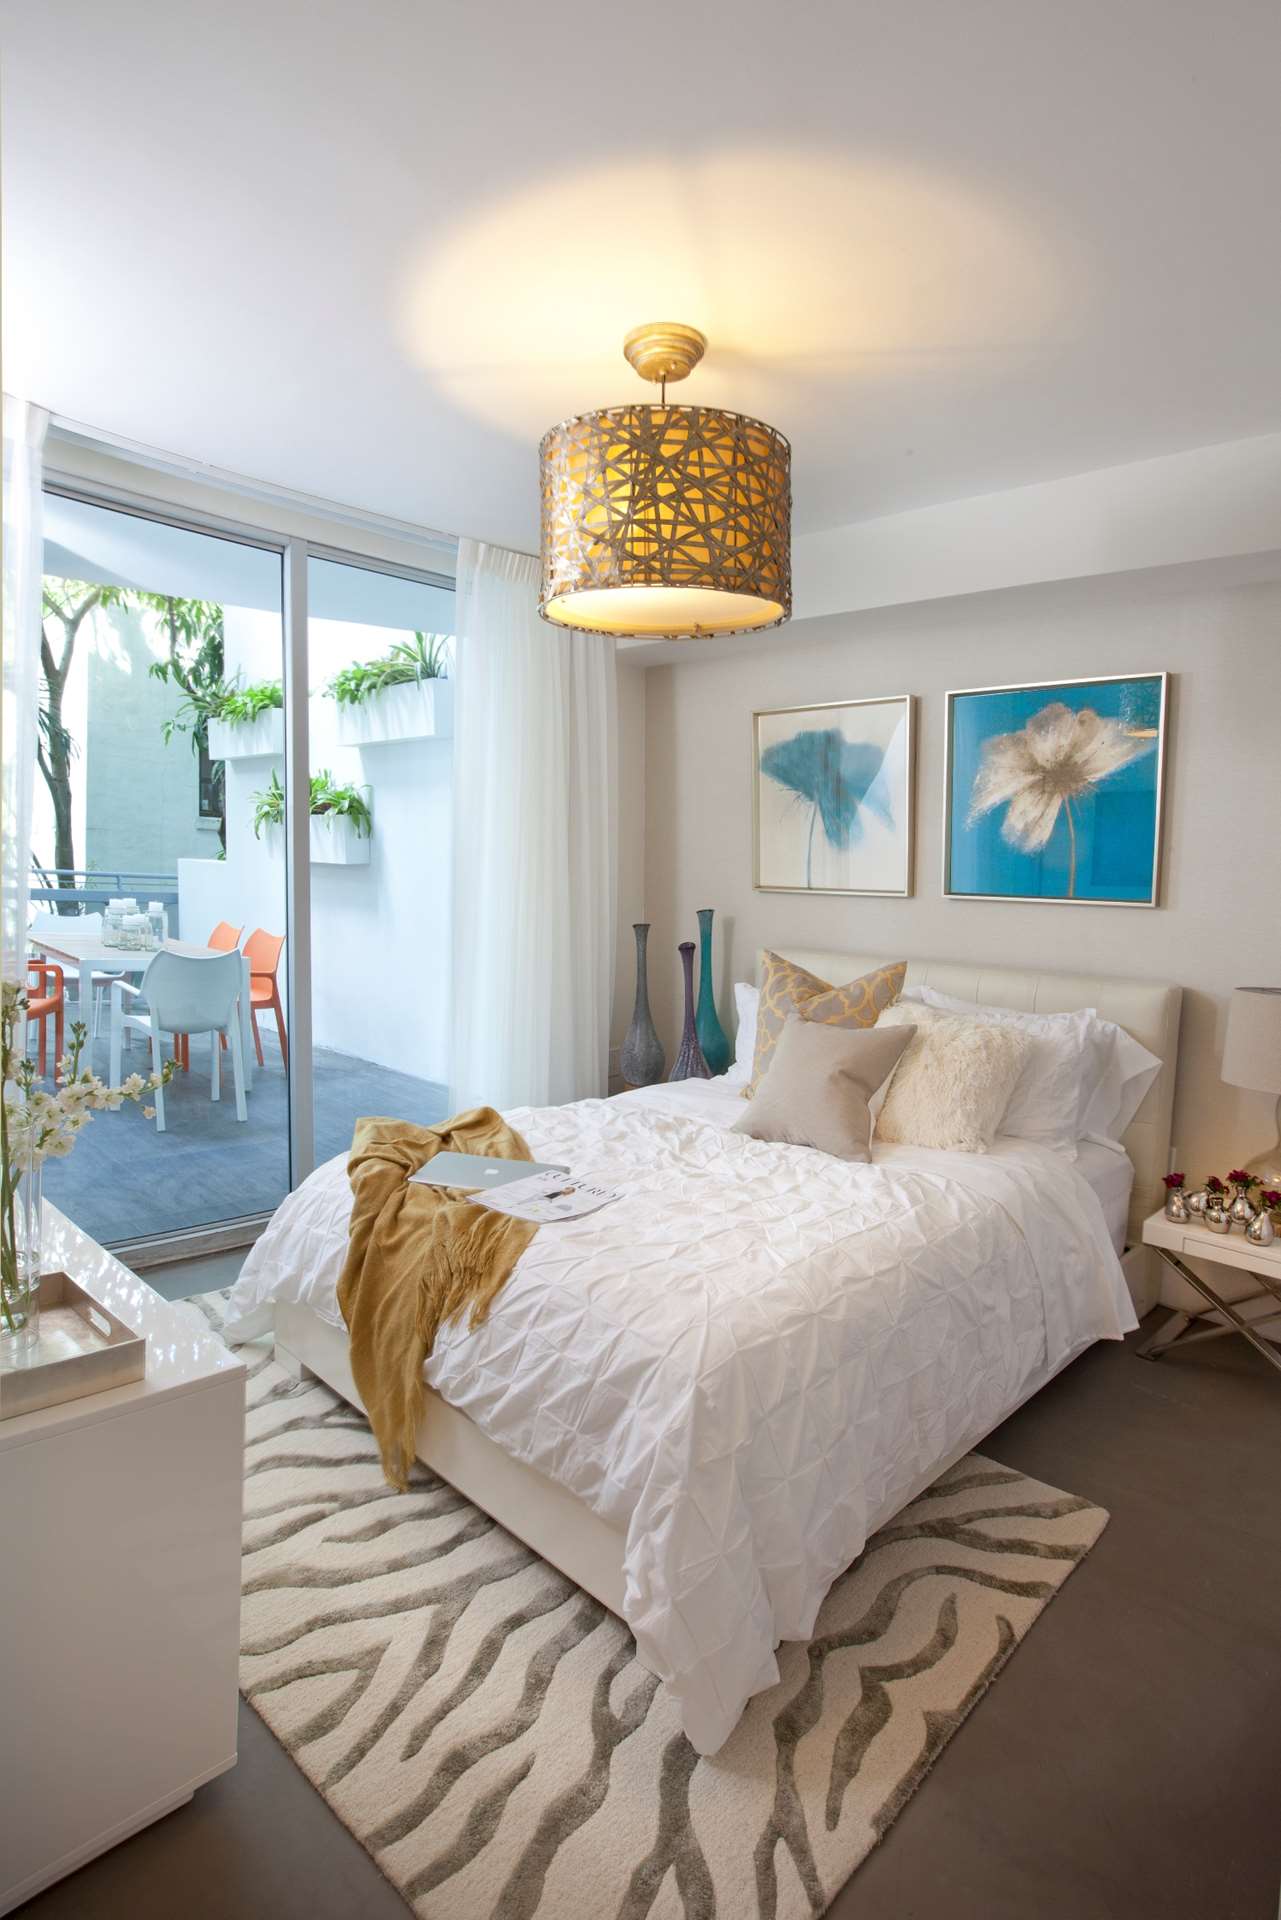 beach bedroom chic interior modern guest interiors dkor miami south designs bedrooms contemporary designers decor dkorinteriors awe inspiring inspired walls